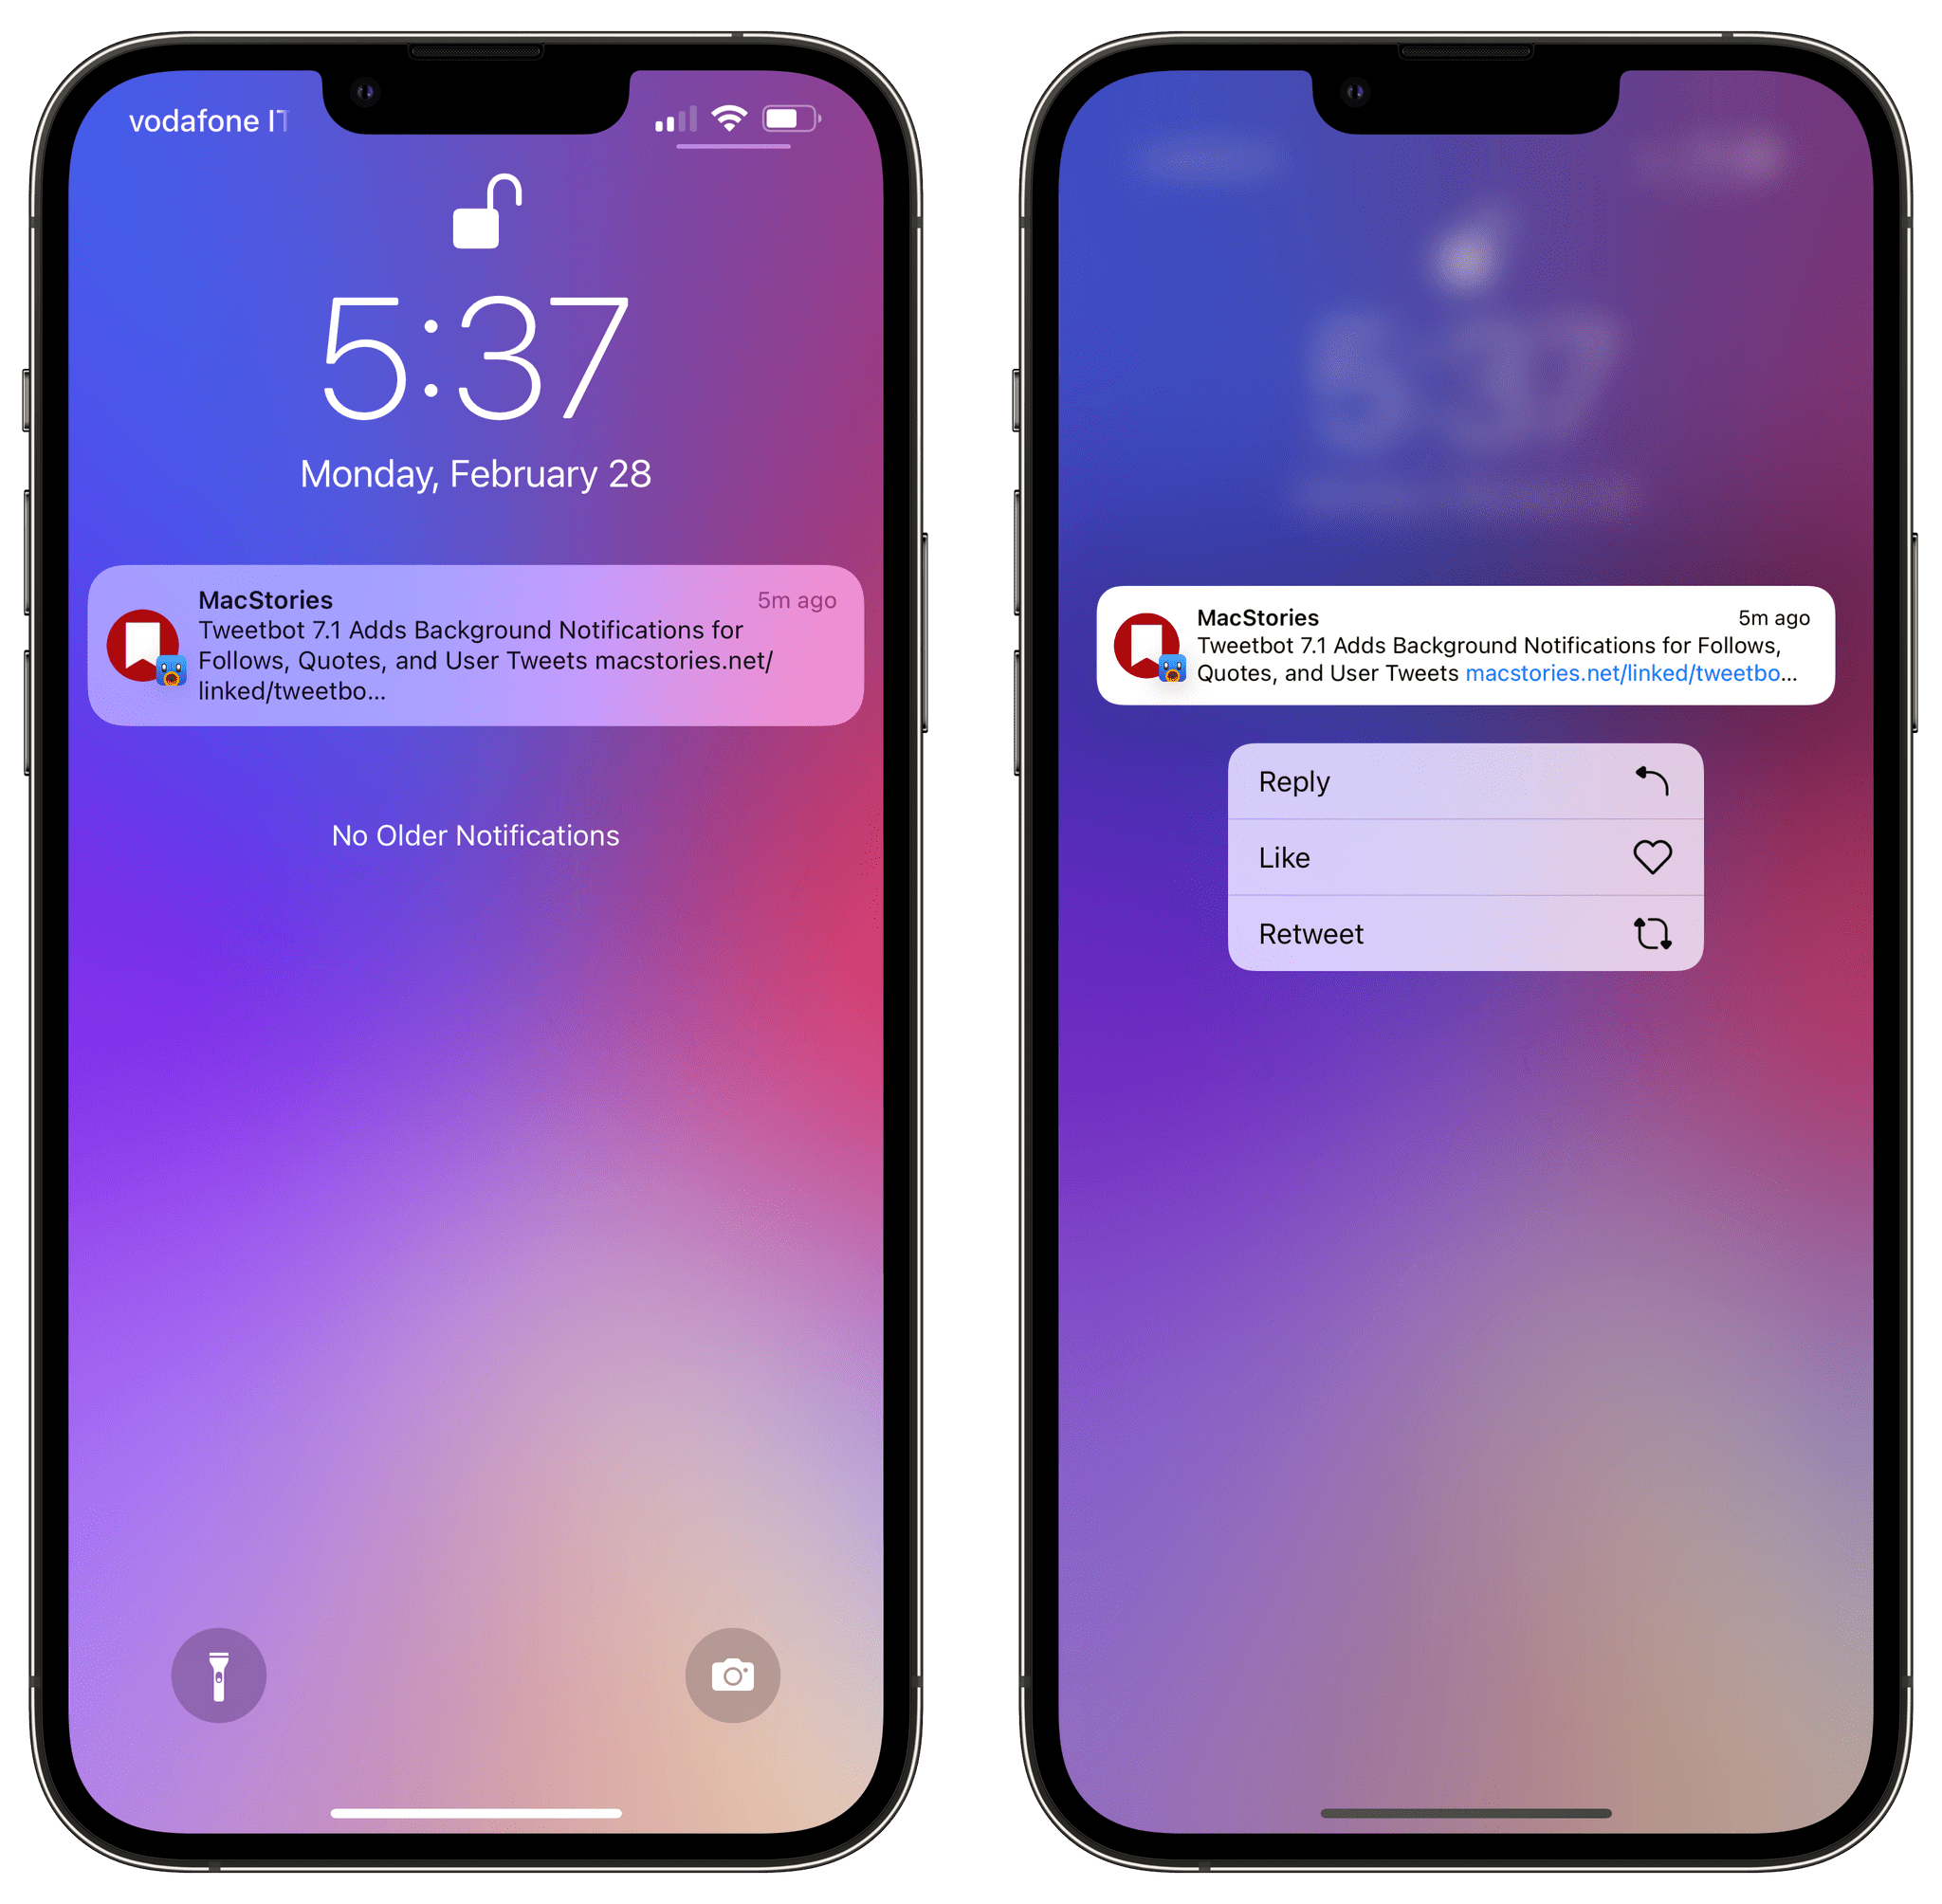 A tweet notification from Tweetbot. This one took about four minutes to arrive – not too bad considering they're not based on push notifications.